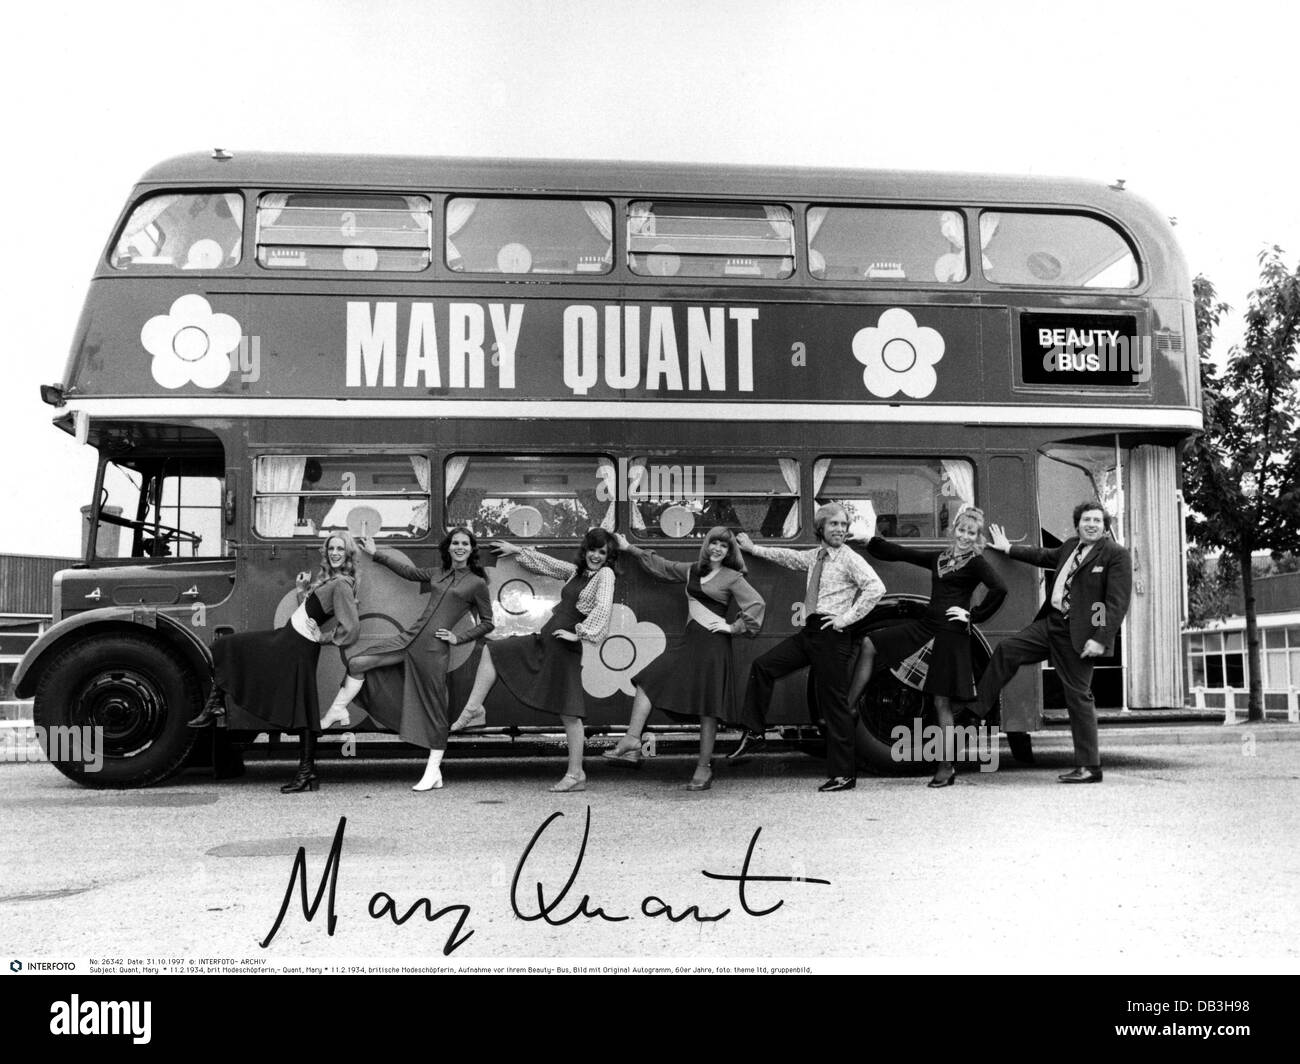 Quant, Mary, * 11.2.1934, British fashion designer, photograph of her Beauty Bus, 1960s, Stock Photo